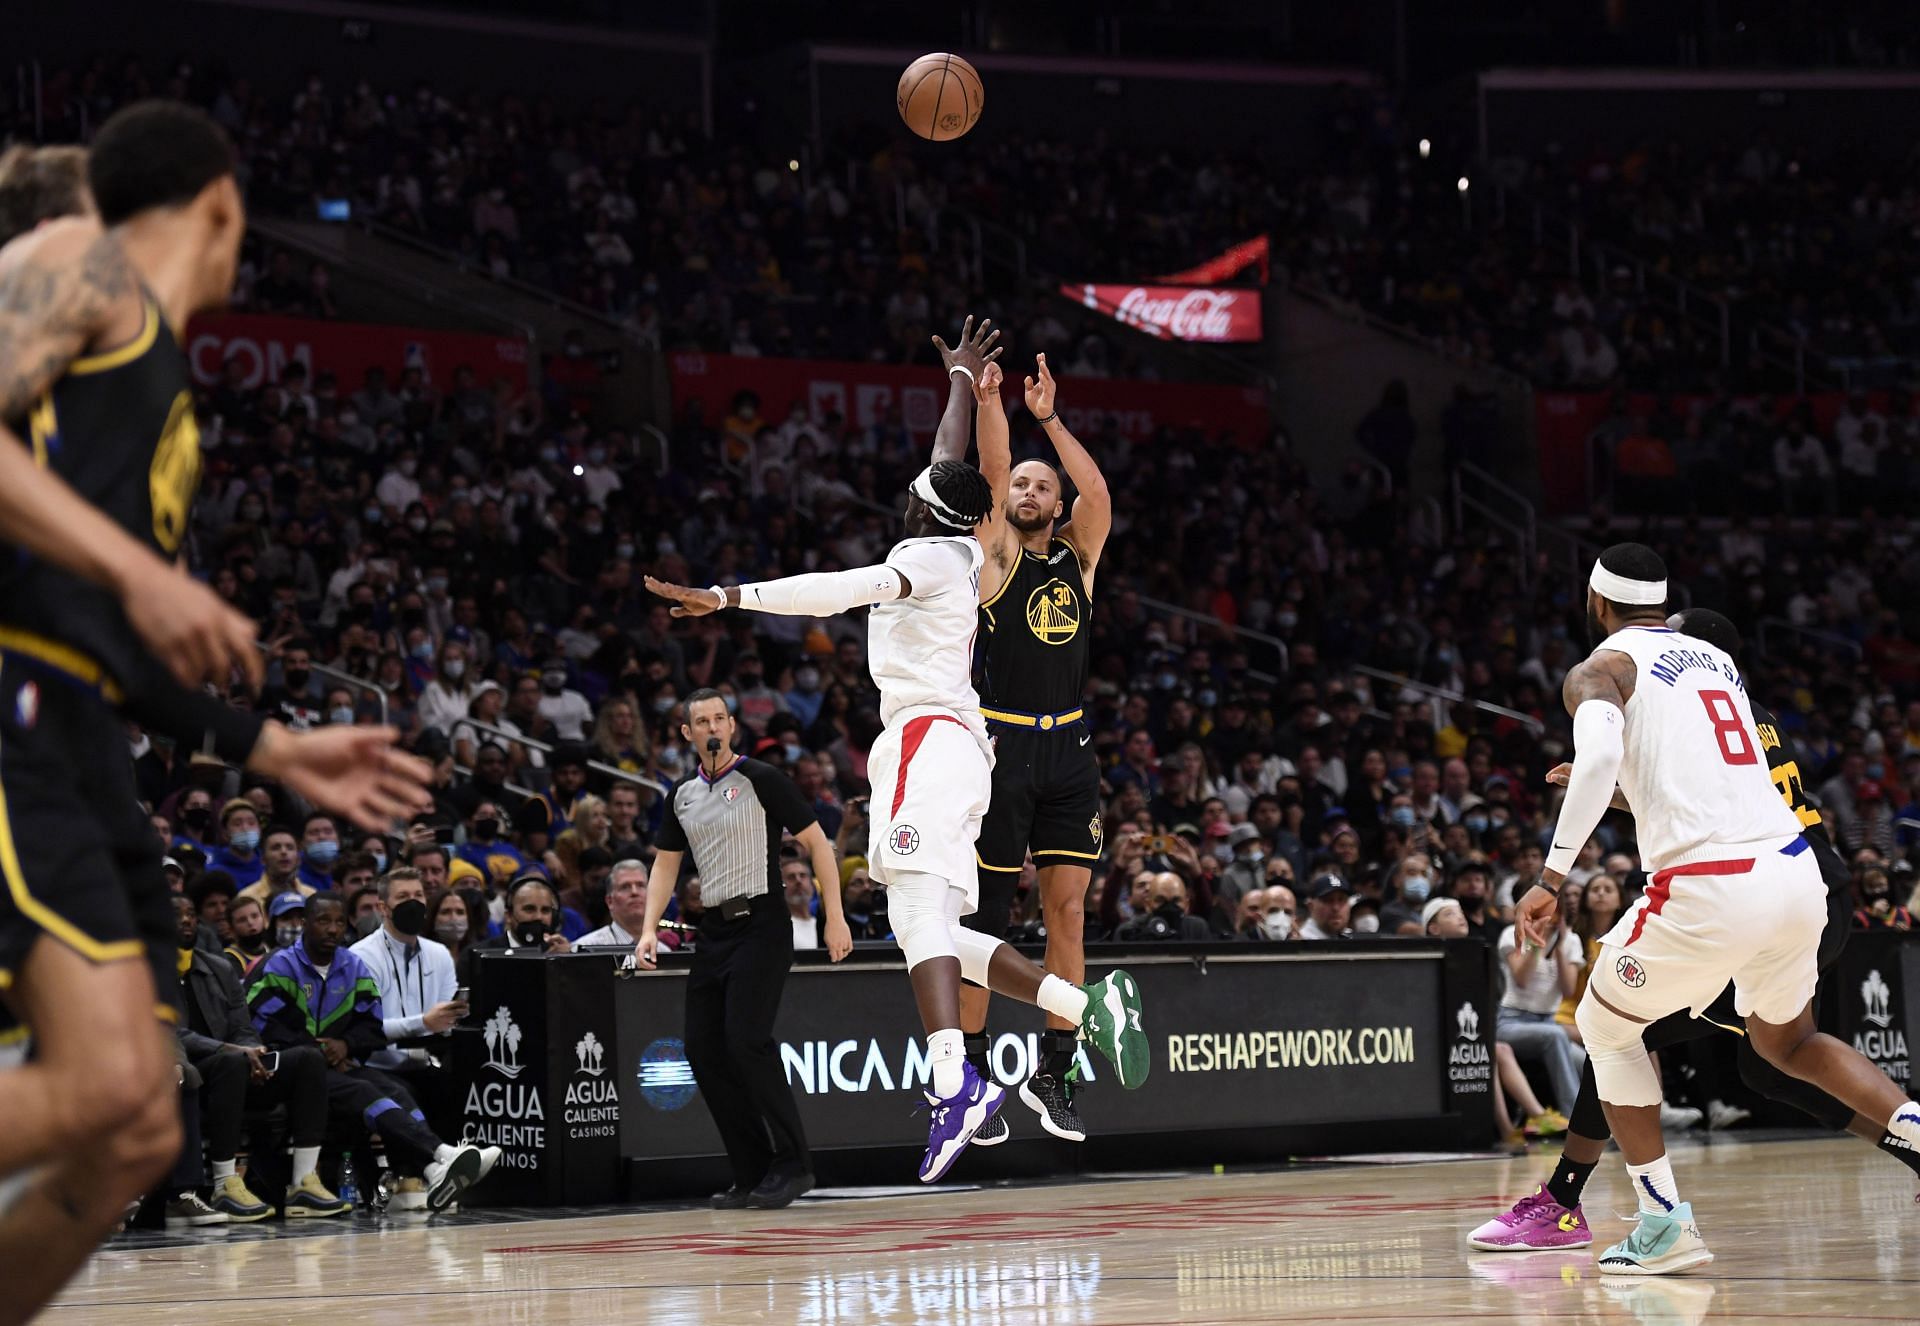 Steph Curry shoots over an LA Clippers defender